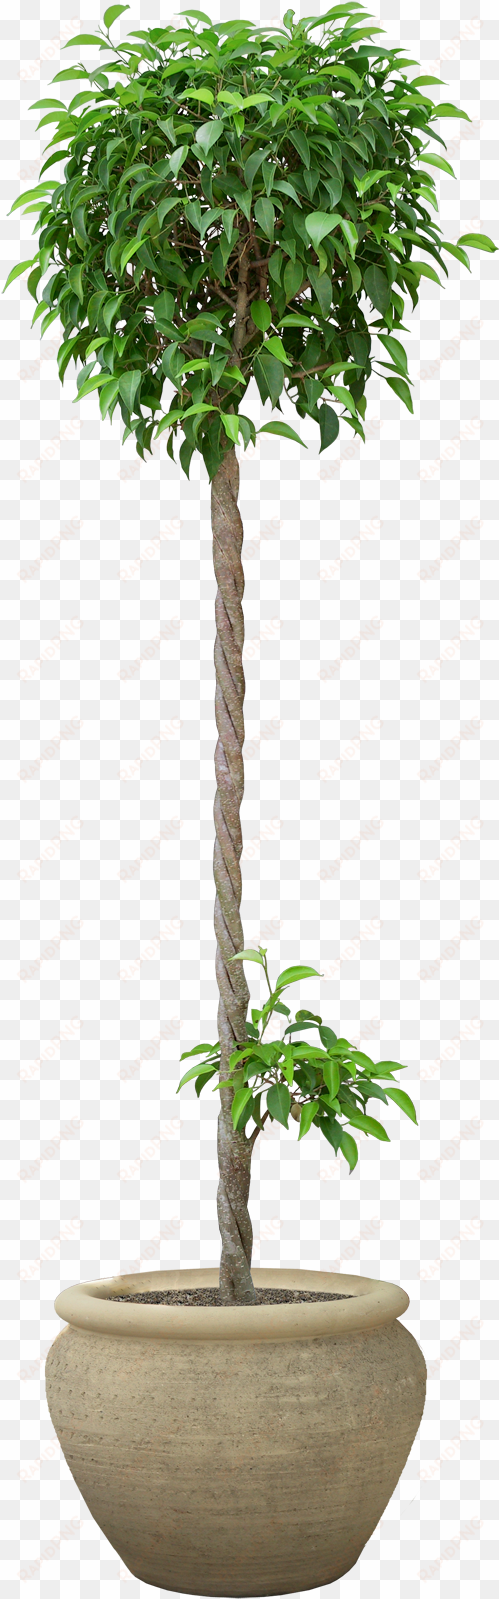 potted plant png - plants